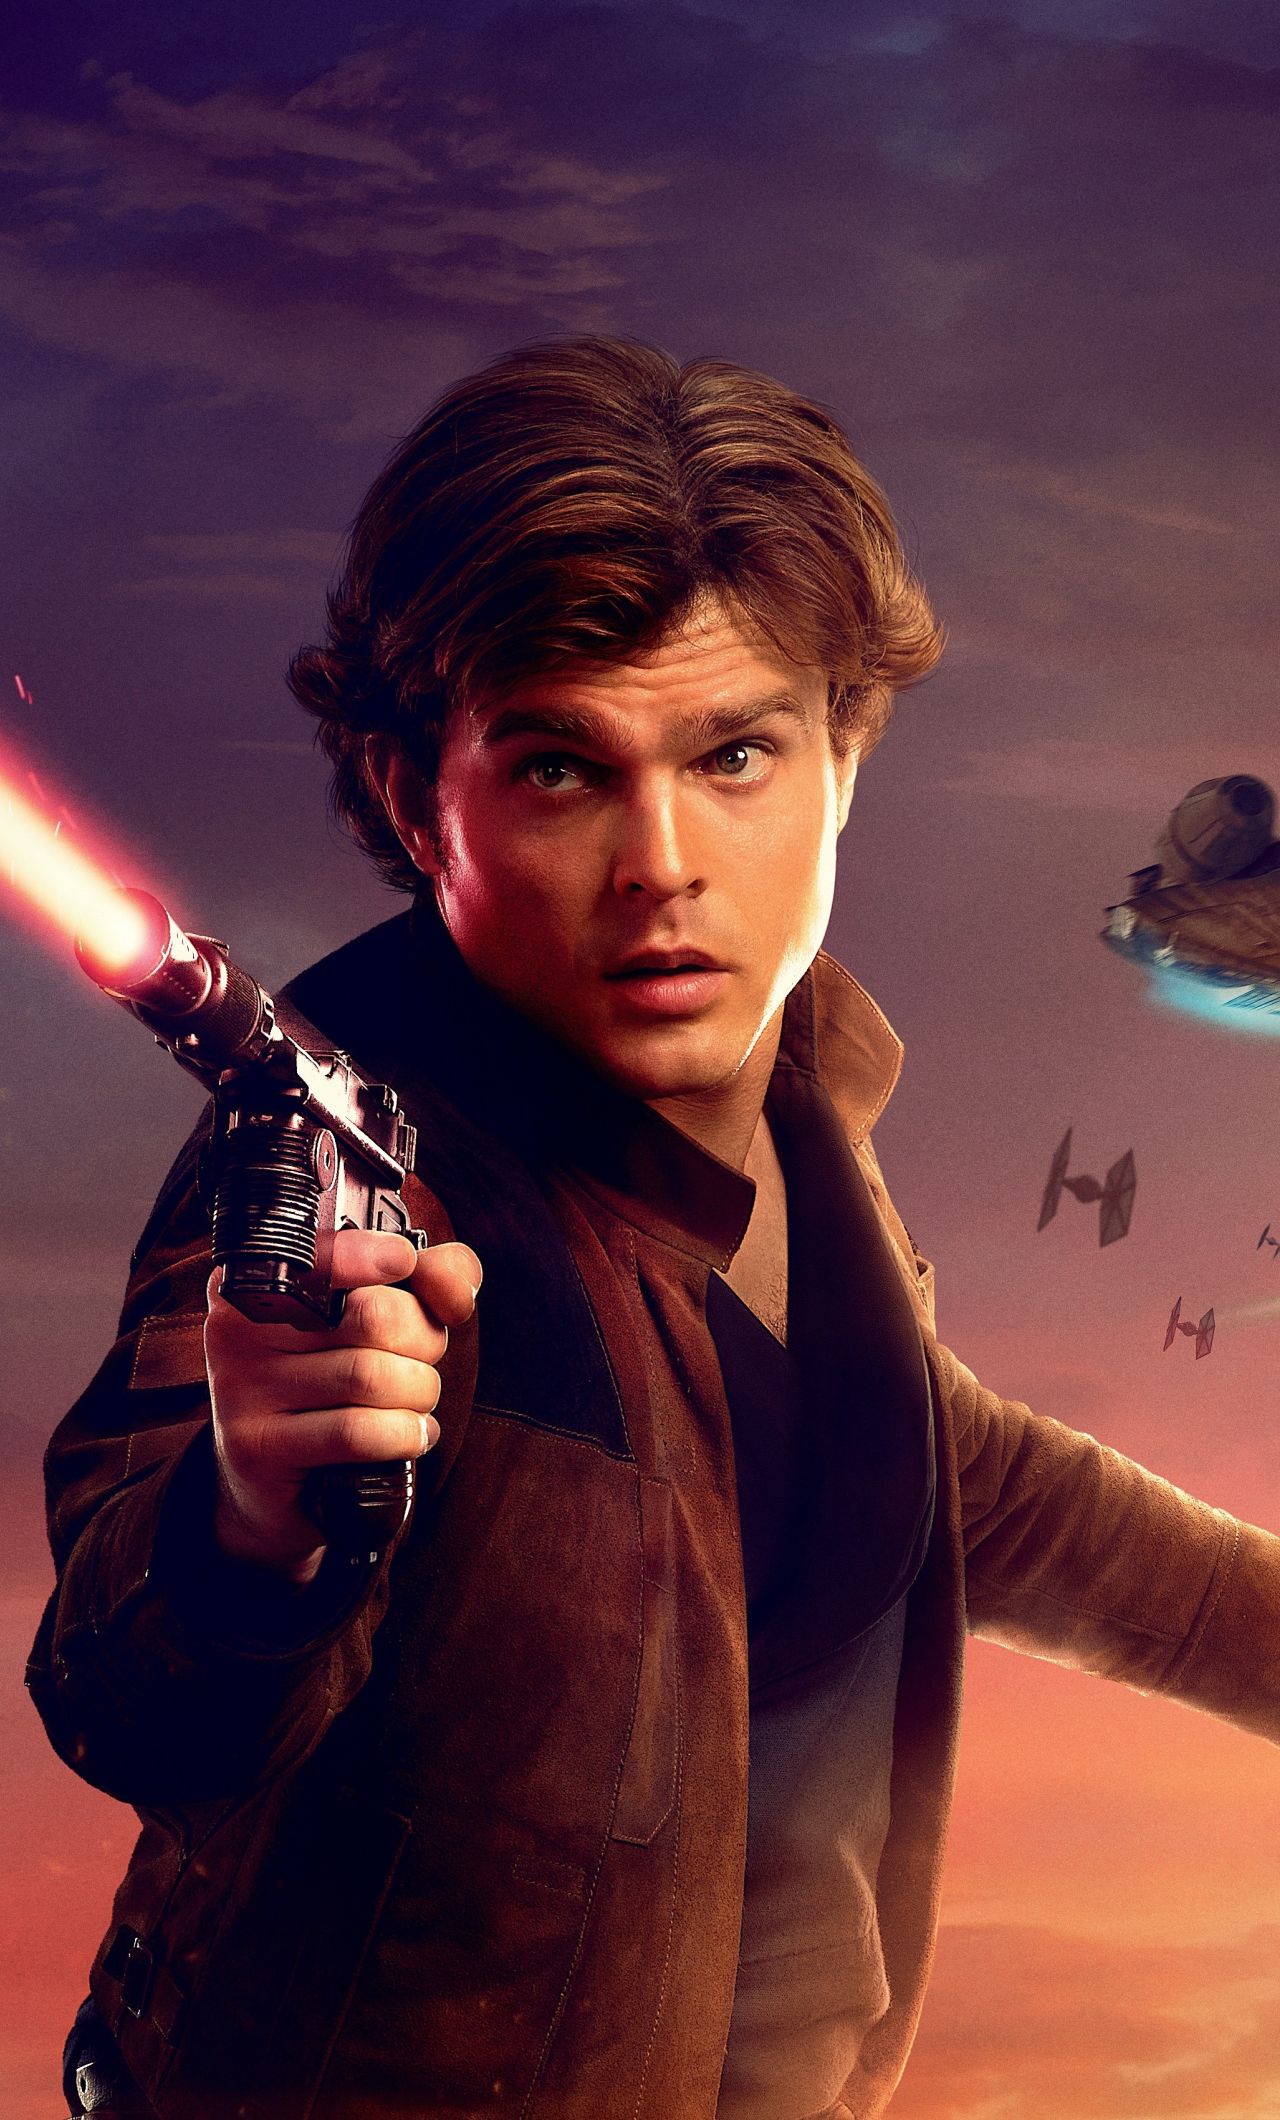 Download 1280x2120 wallpaper solo: a star wars story, alden ehrenreich, han solo, iphone 6 plus, 1280x2120 HD image, background, 7900